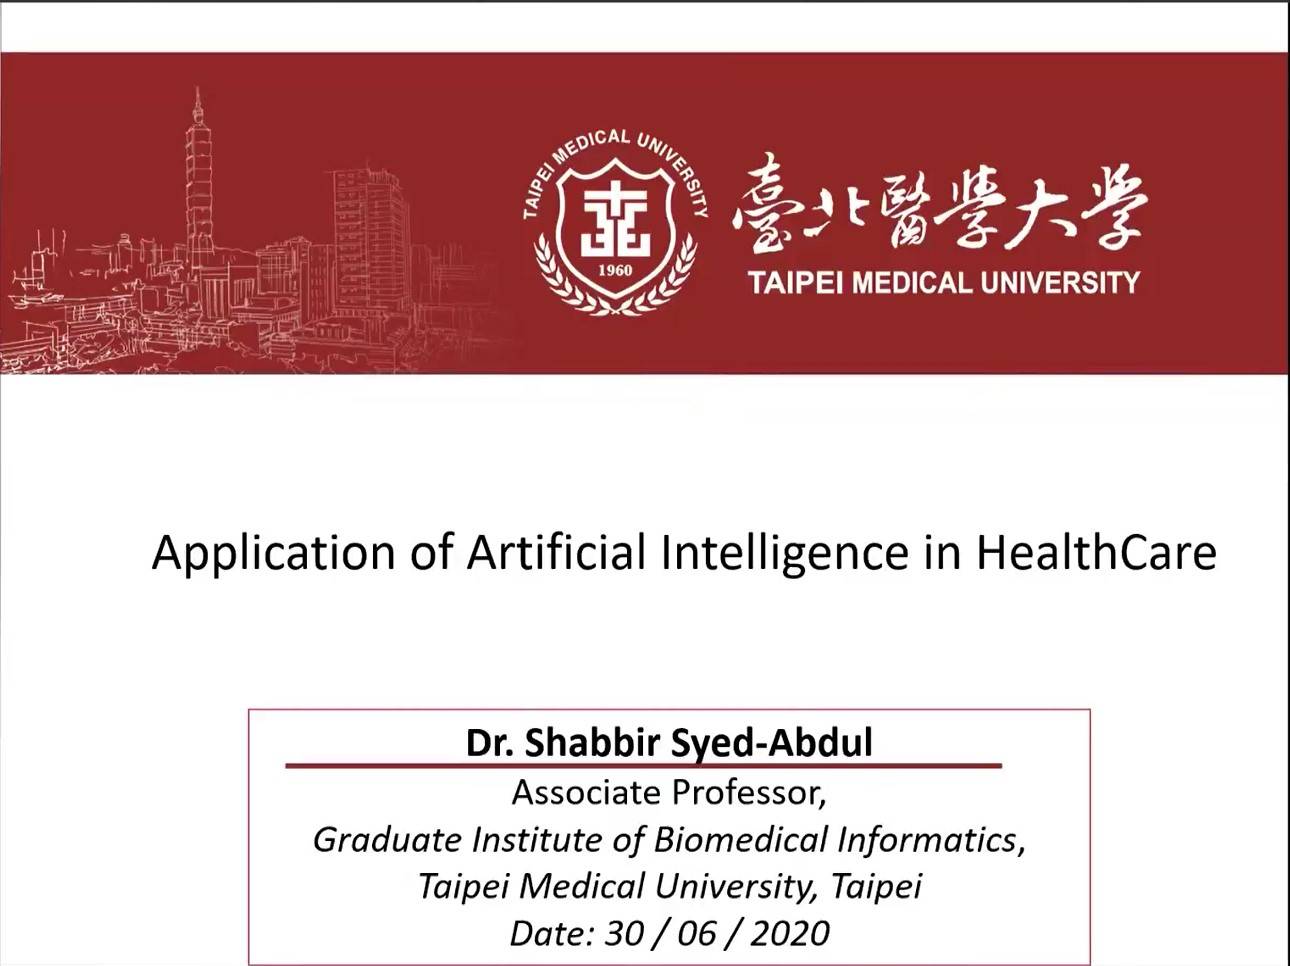 Artificial Intelligence of Things (AIoT) is the combination of artificial intelligence and internet of things (IoT), and has opened a wide range of opportunities for healthcare advancements. Wearable devices, non-contact sensors, m-health technologies are some examples of IoT which when connected to the internet can collect valuable medical data. This data can provide insights about the symptoms, the patterns and variations, enable remote care and monitoring, and encourage participatory health care among the patients. Research has focused on the IoT devices, and how they can be used to monitor health parameters and detect health conditions. Non-contact sensors are gaining popularity in clinical settings for monitoring the vital parameters of patients. Application of artificial intelligence (AI) algorithms on the data collected from IoT devices can help in prediction, early detection, and better management of diseases. These models could assist healthcare professionals in decision making and formulating better care plans for patients. Thus, artificial intelligence has a wide range of applications for healthcare data from IoT devices.